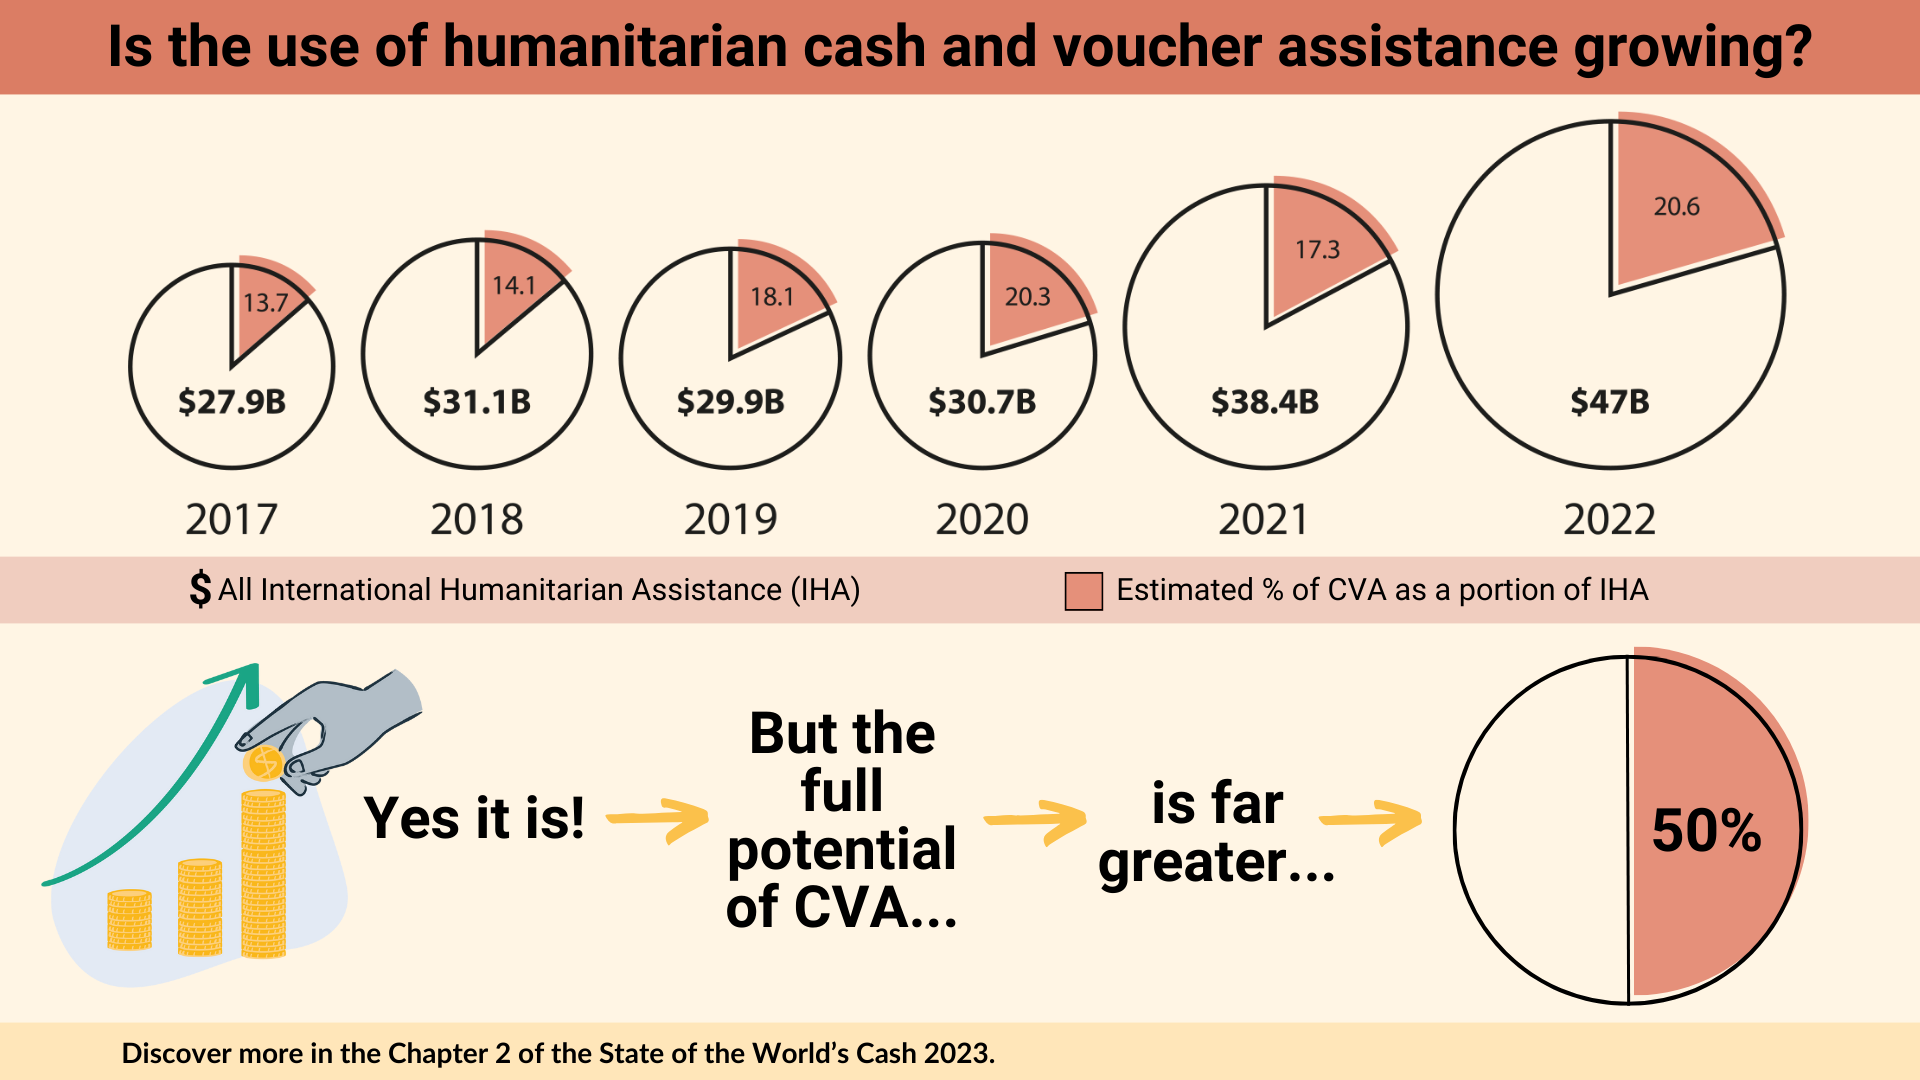 An infographic depicts the growth of humanitarian cash and voucher assistance (CVA) from 2017 to 2022. Pie charts show the estimated percentage of CVA as a portion of all International Humanitarian Assistance (IHA) for each year. The use of CVA is increasing, with the full potential far greater.